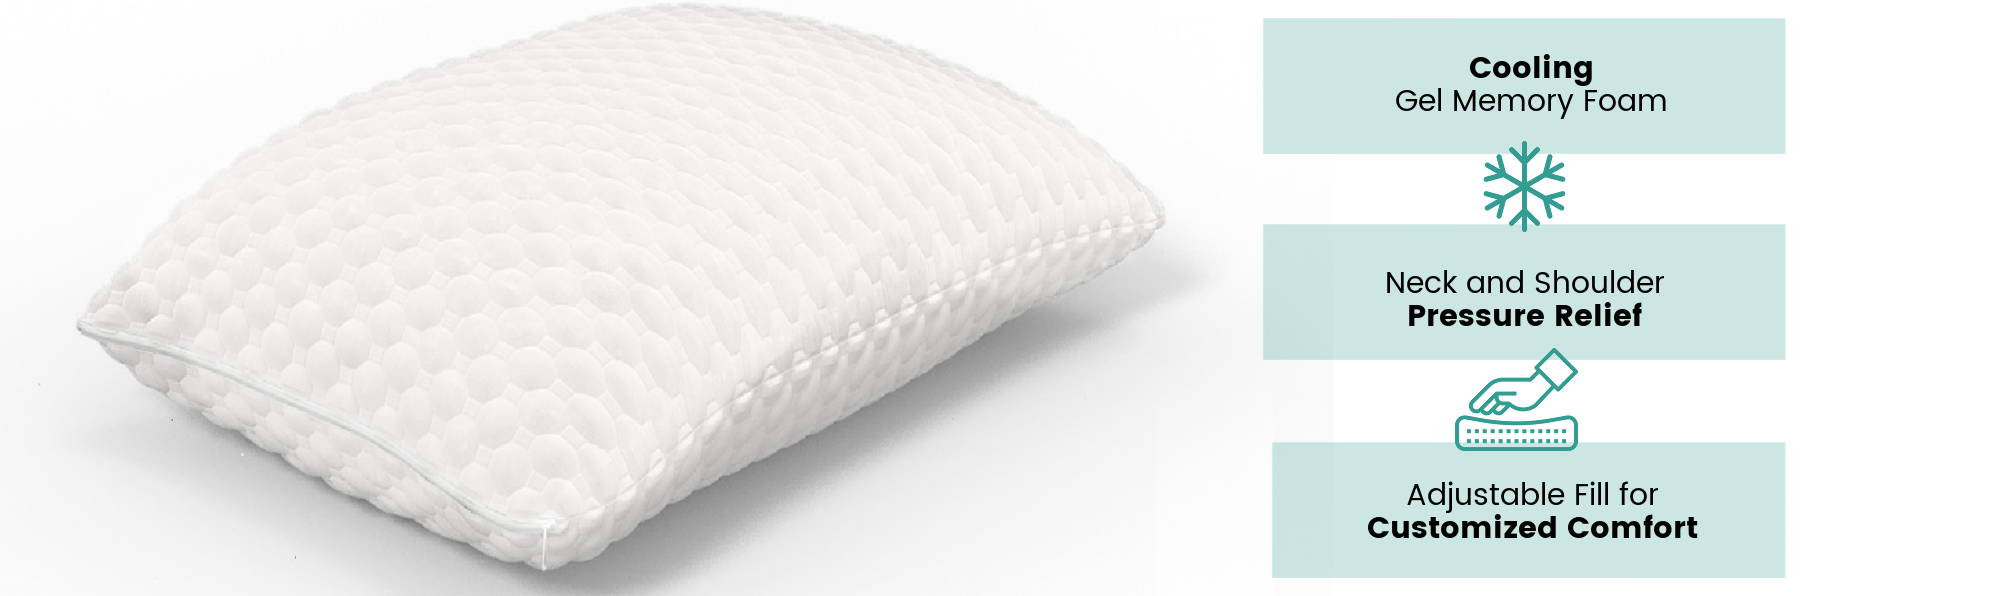 CBD infused pillow on a white background that has cooling gel memory foam, gives neck and shoulder pressure relief, and is customizable with adjustable fill for comfort.